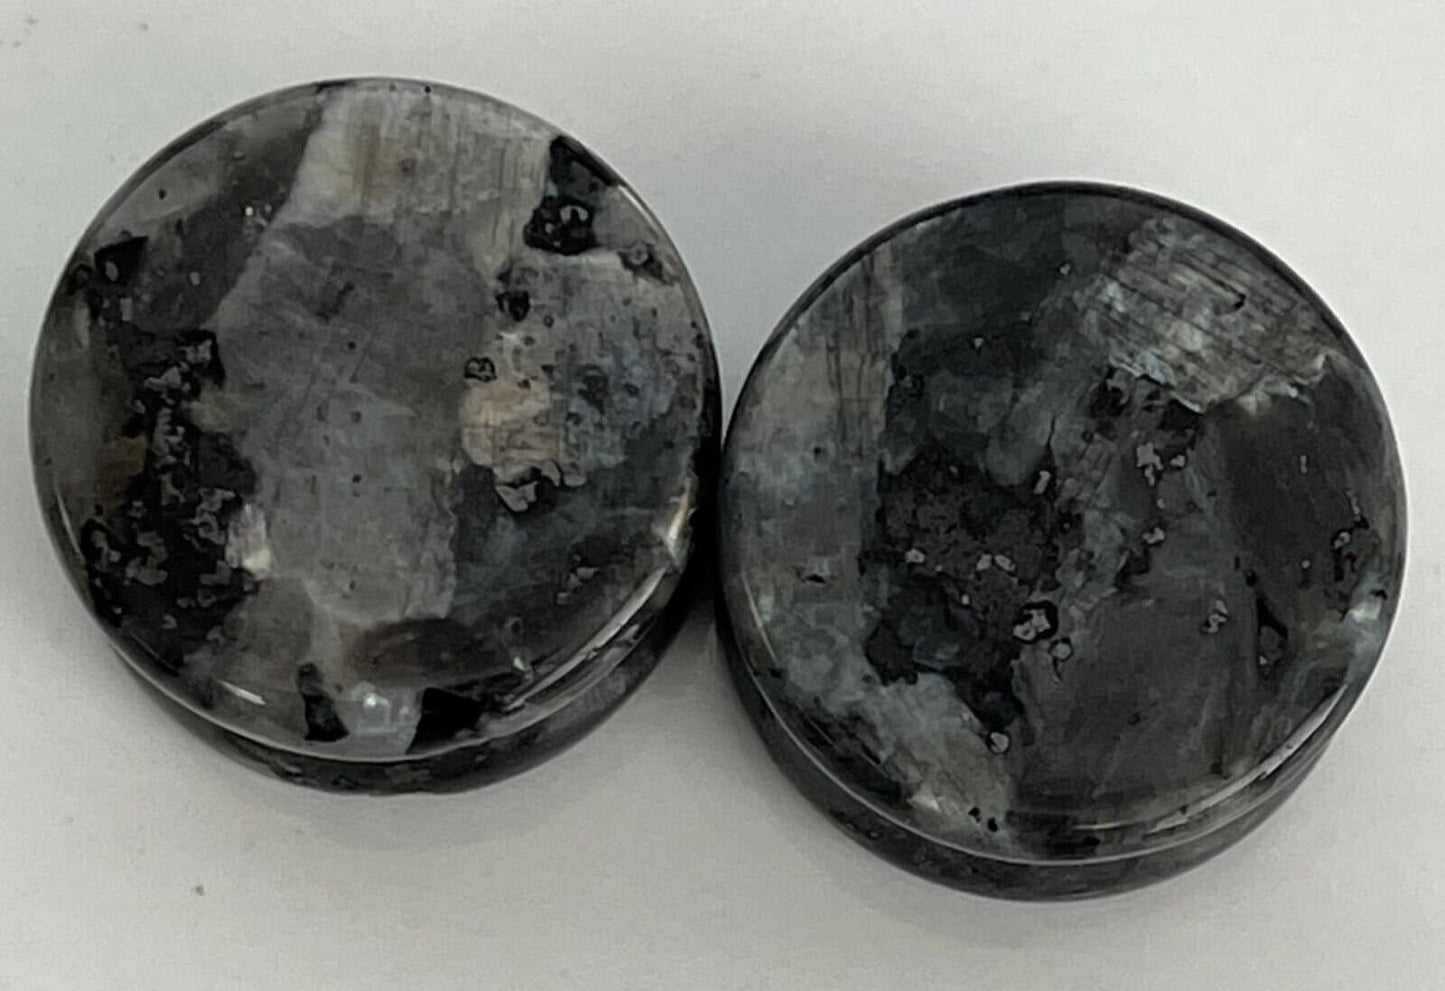 PAIR of Unique Natural Black Labradorite Organic Stone Double Flare Plugs/Tunnels - Gauges 2g (6mm) up to 3/4" (19mm) available!